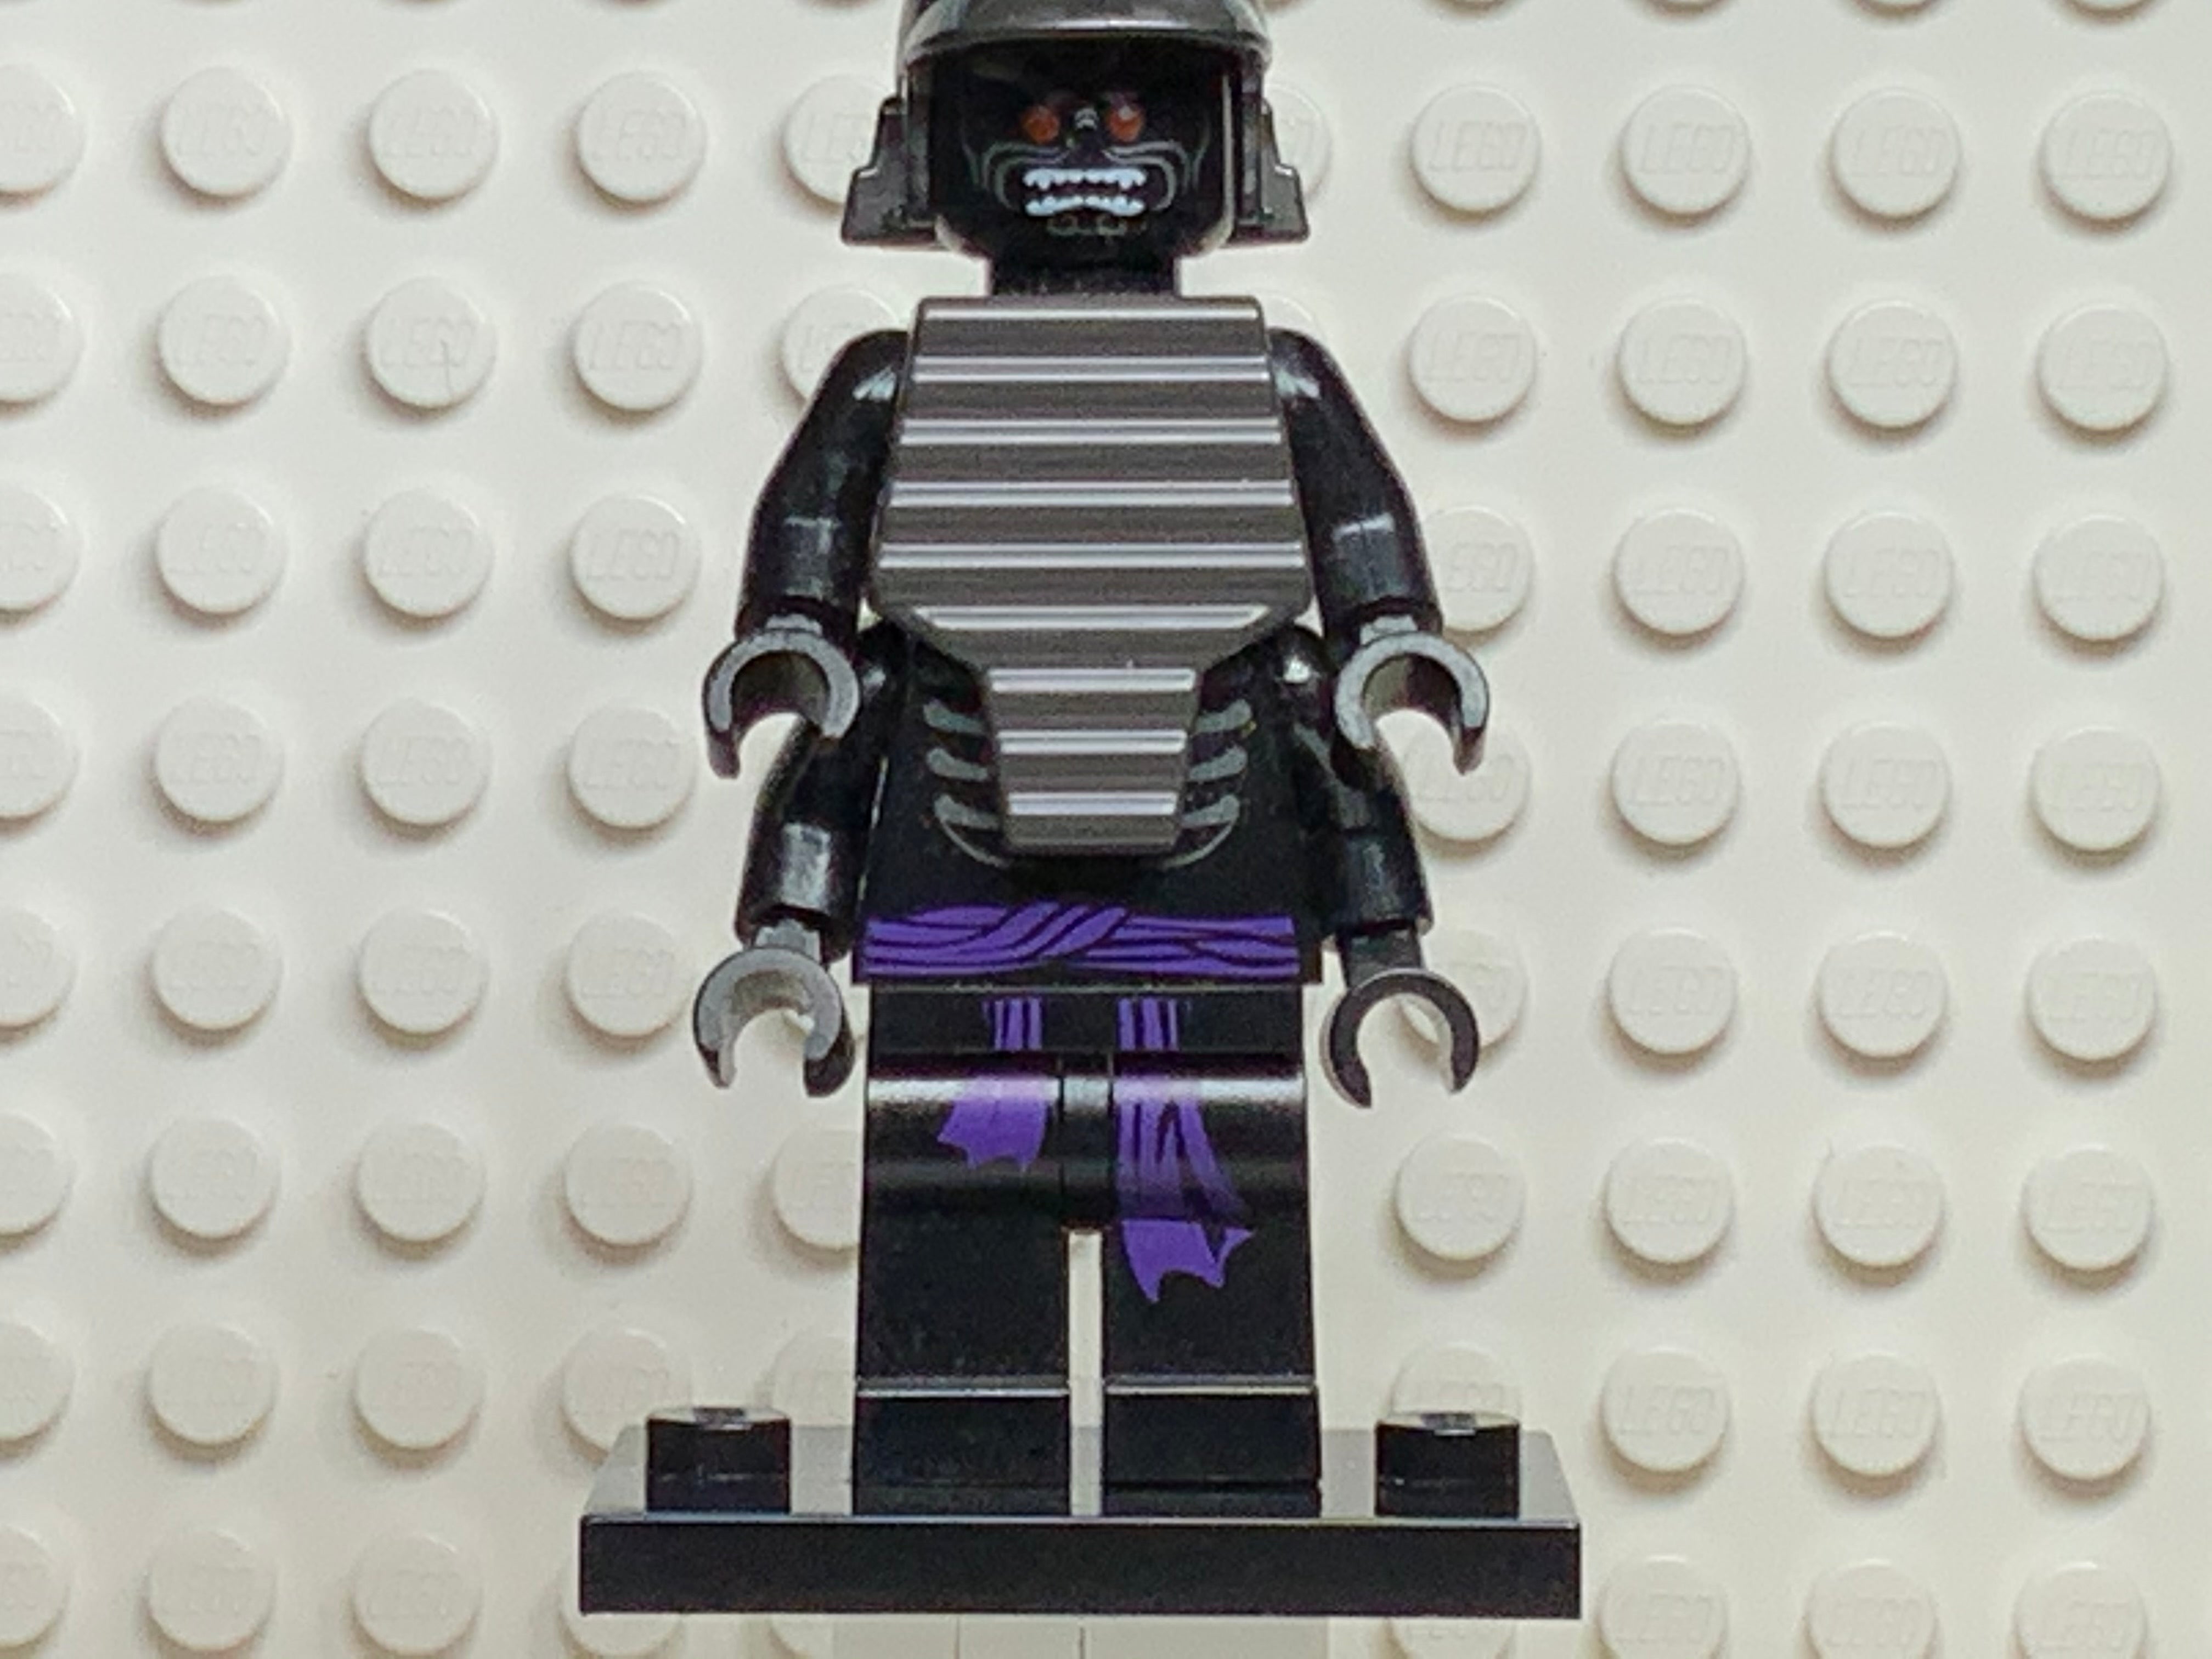 Details about   Lego Ninjago Lord Garmadon Minifigure NJO042 Excellent Pre Owned 